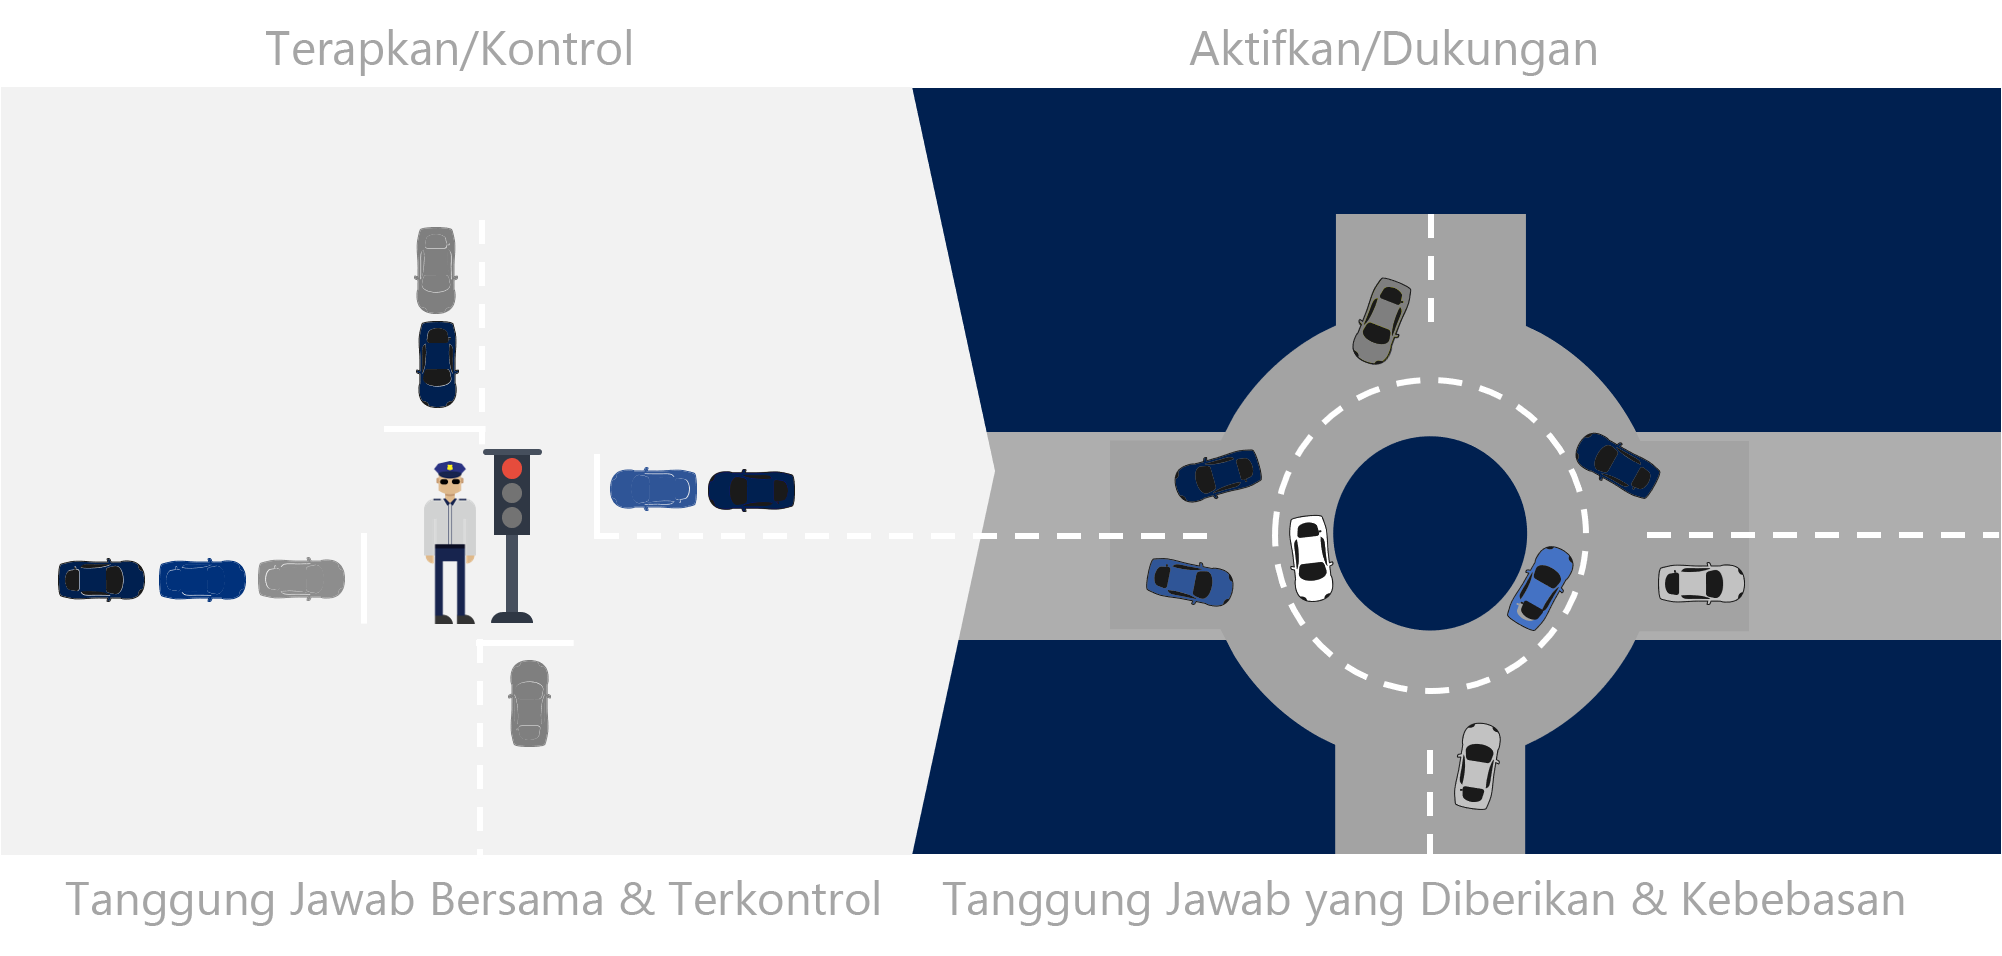 Diagram of an analogy that uses traffic routing to demonstrate the shift in IT operations.